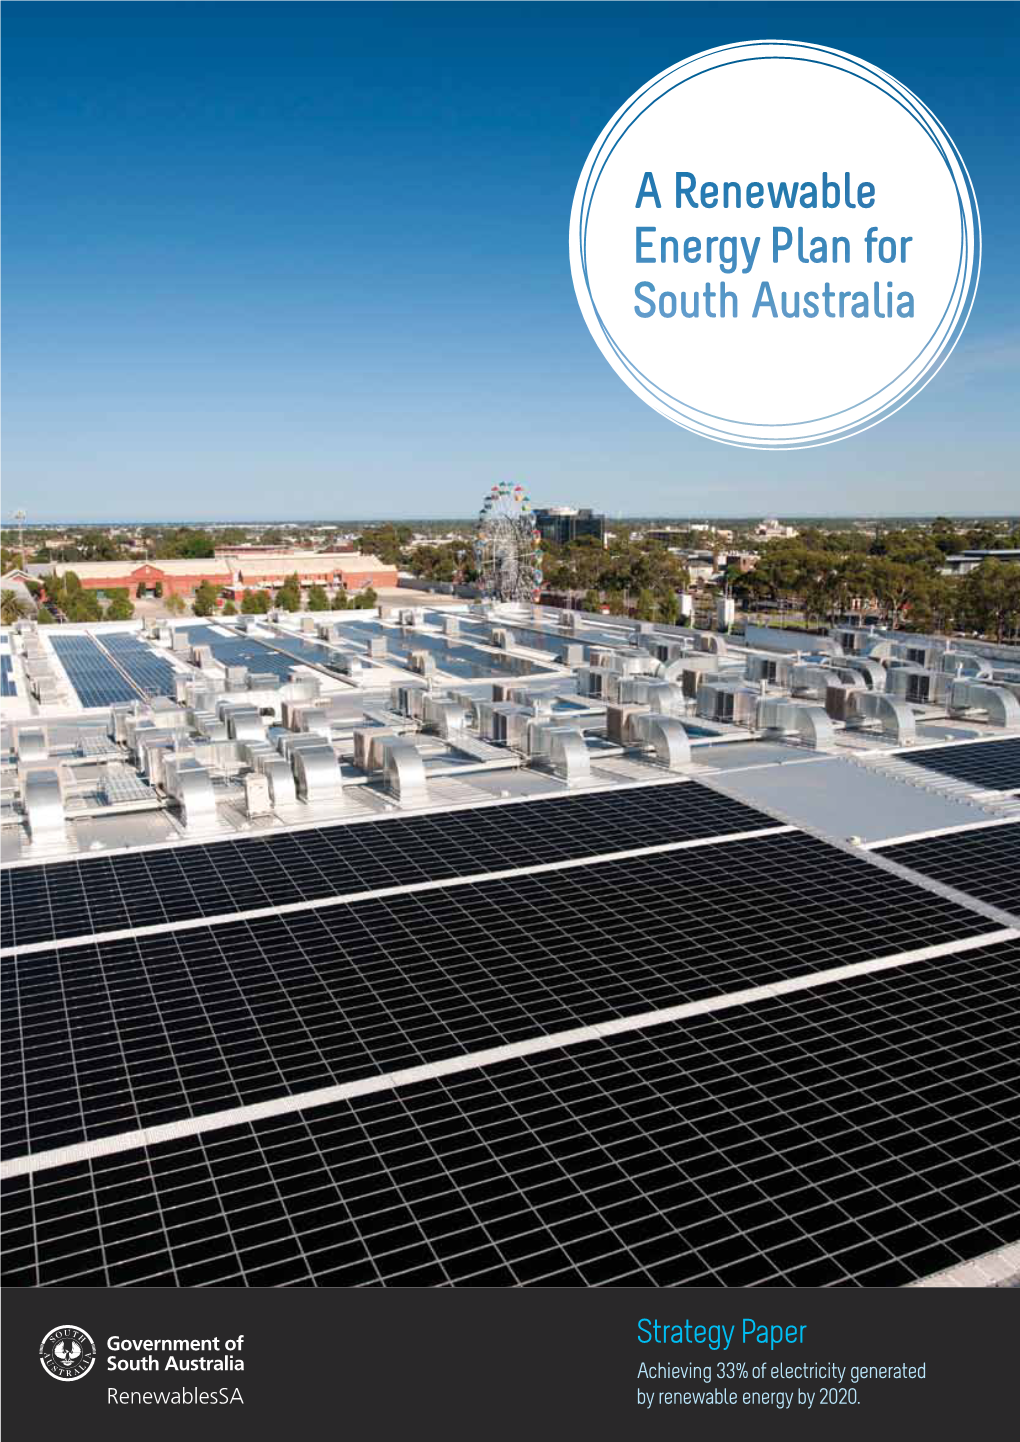 Strategy Paper Achieving 33% of Electricity Generated by Renewable Energy by 2020